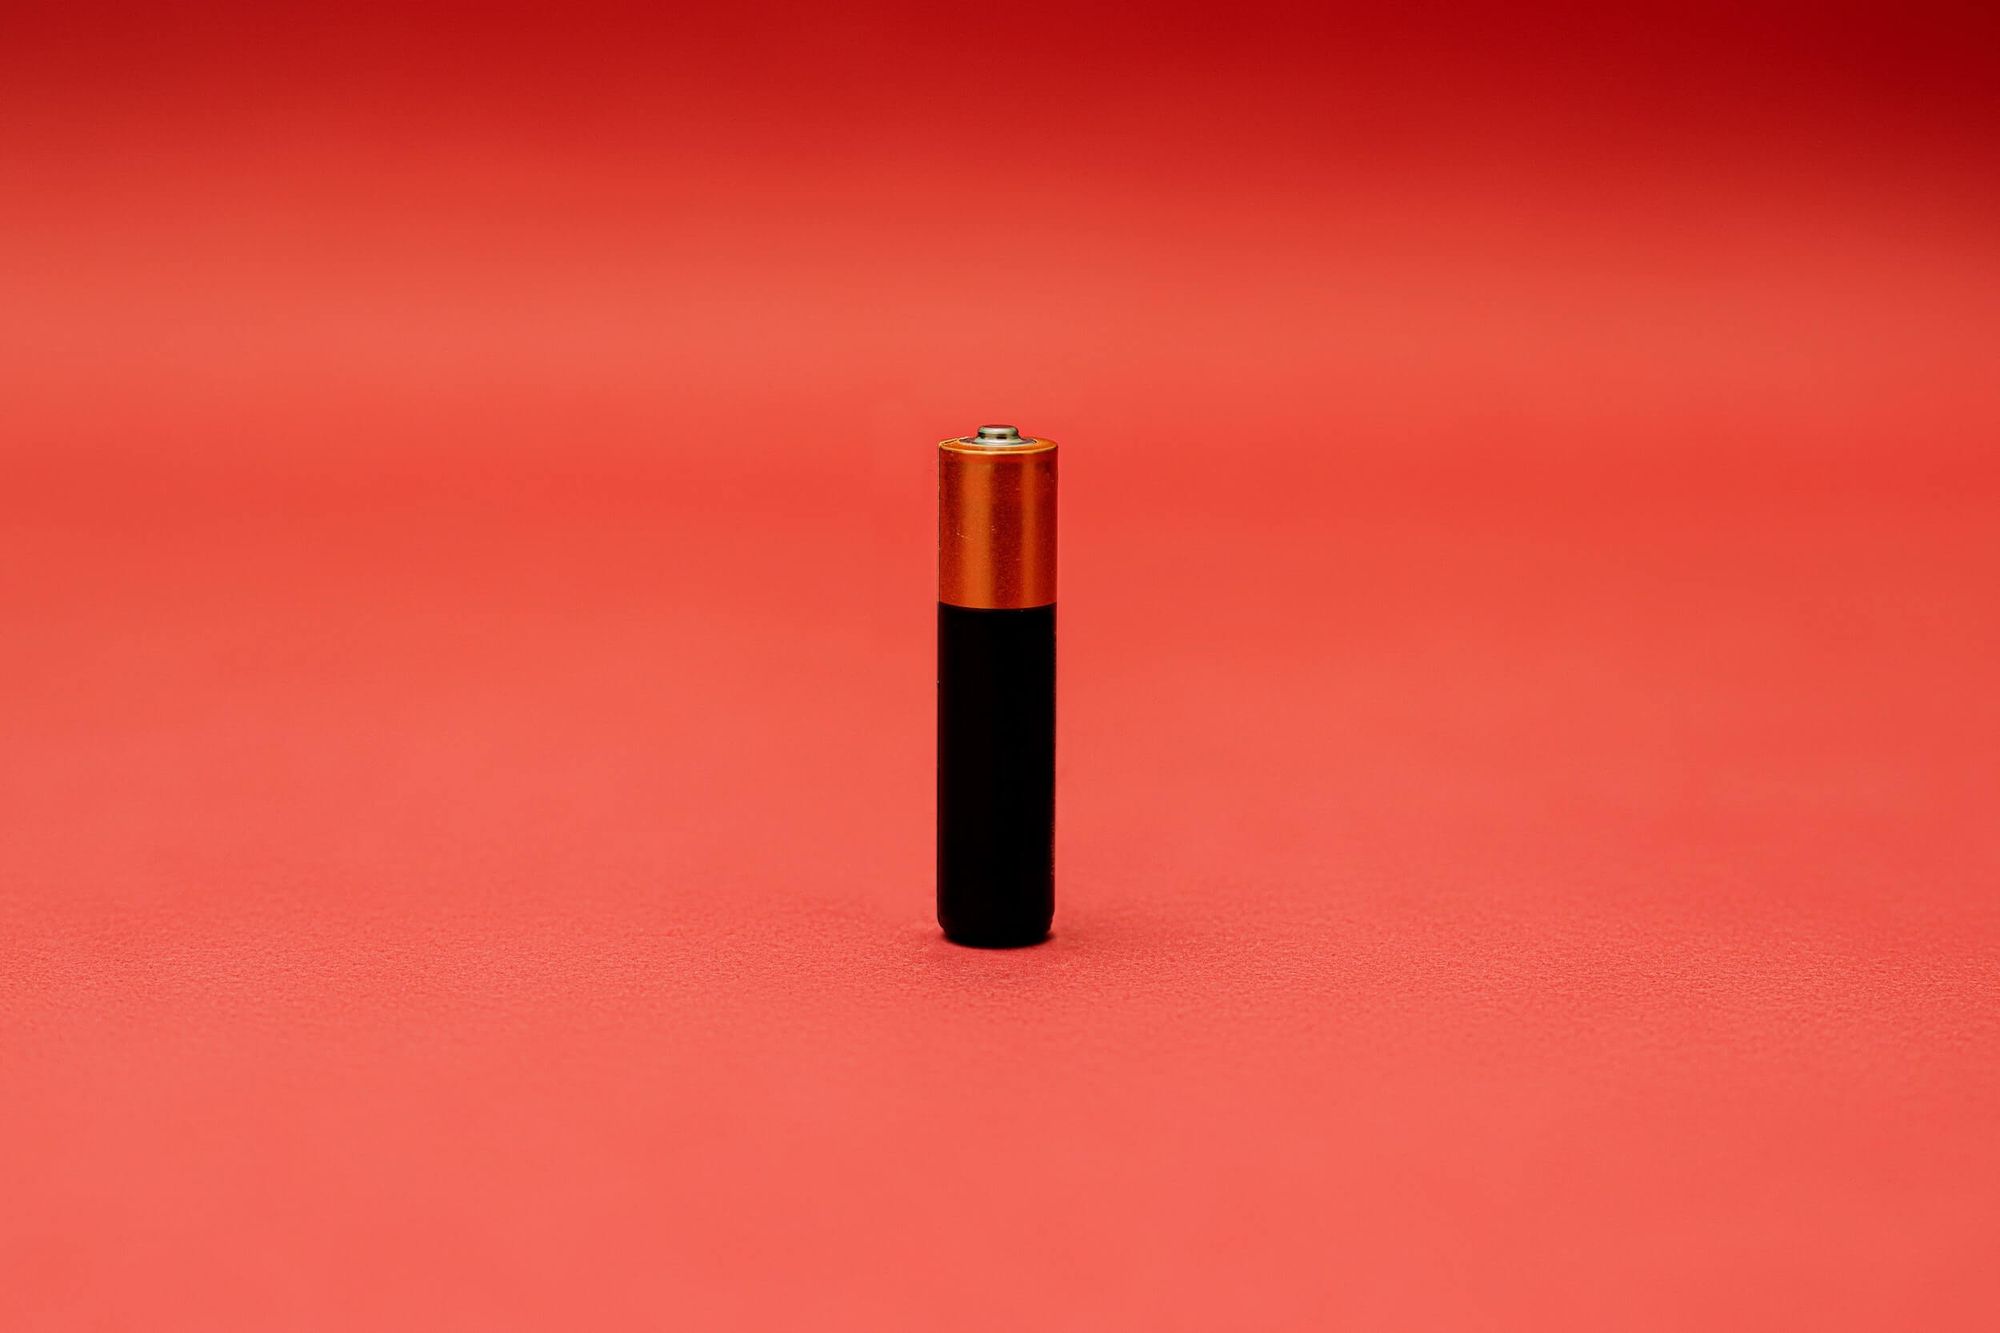 A single Duracell-style battery standing vertically against a pink background. 